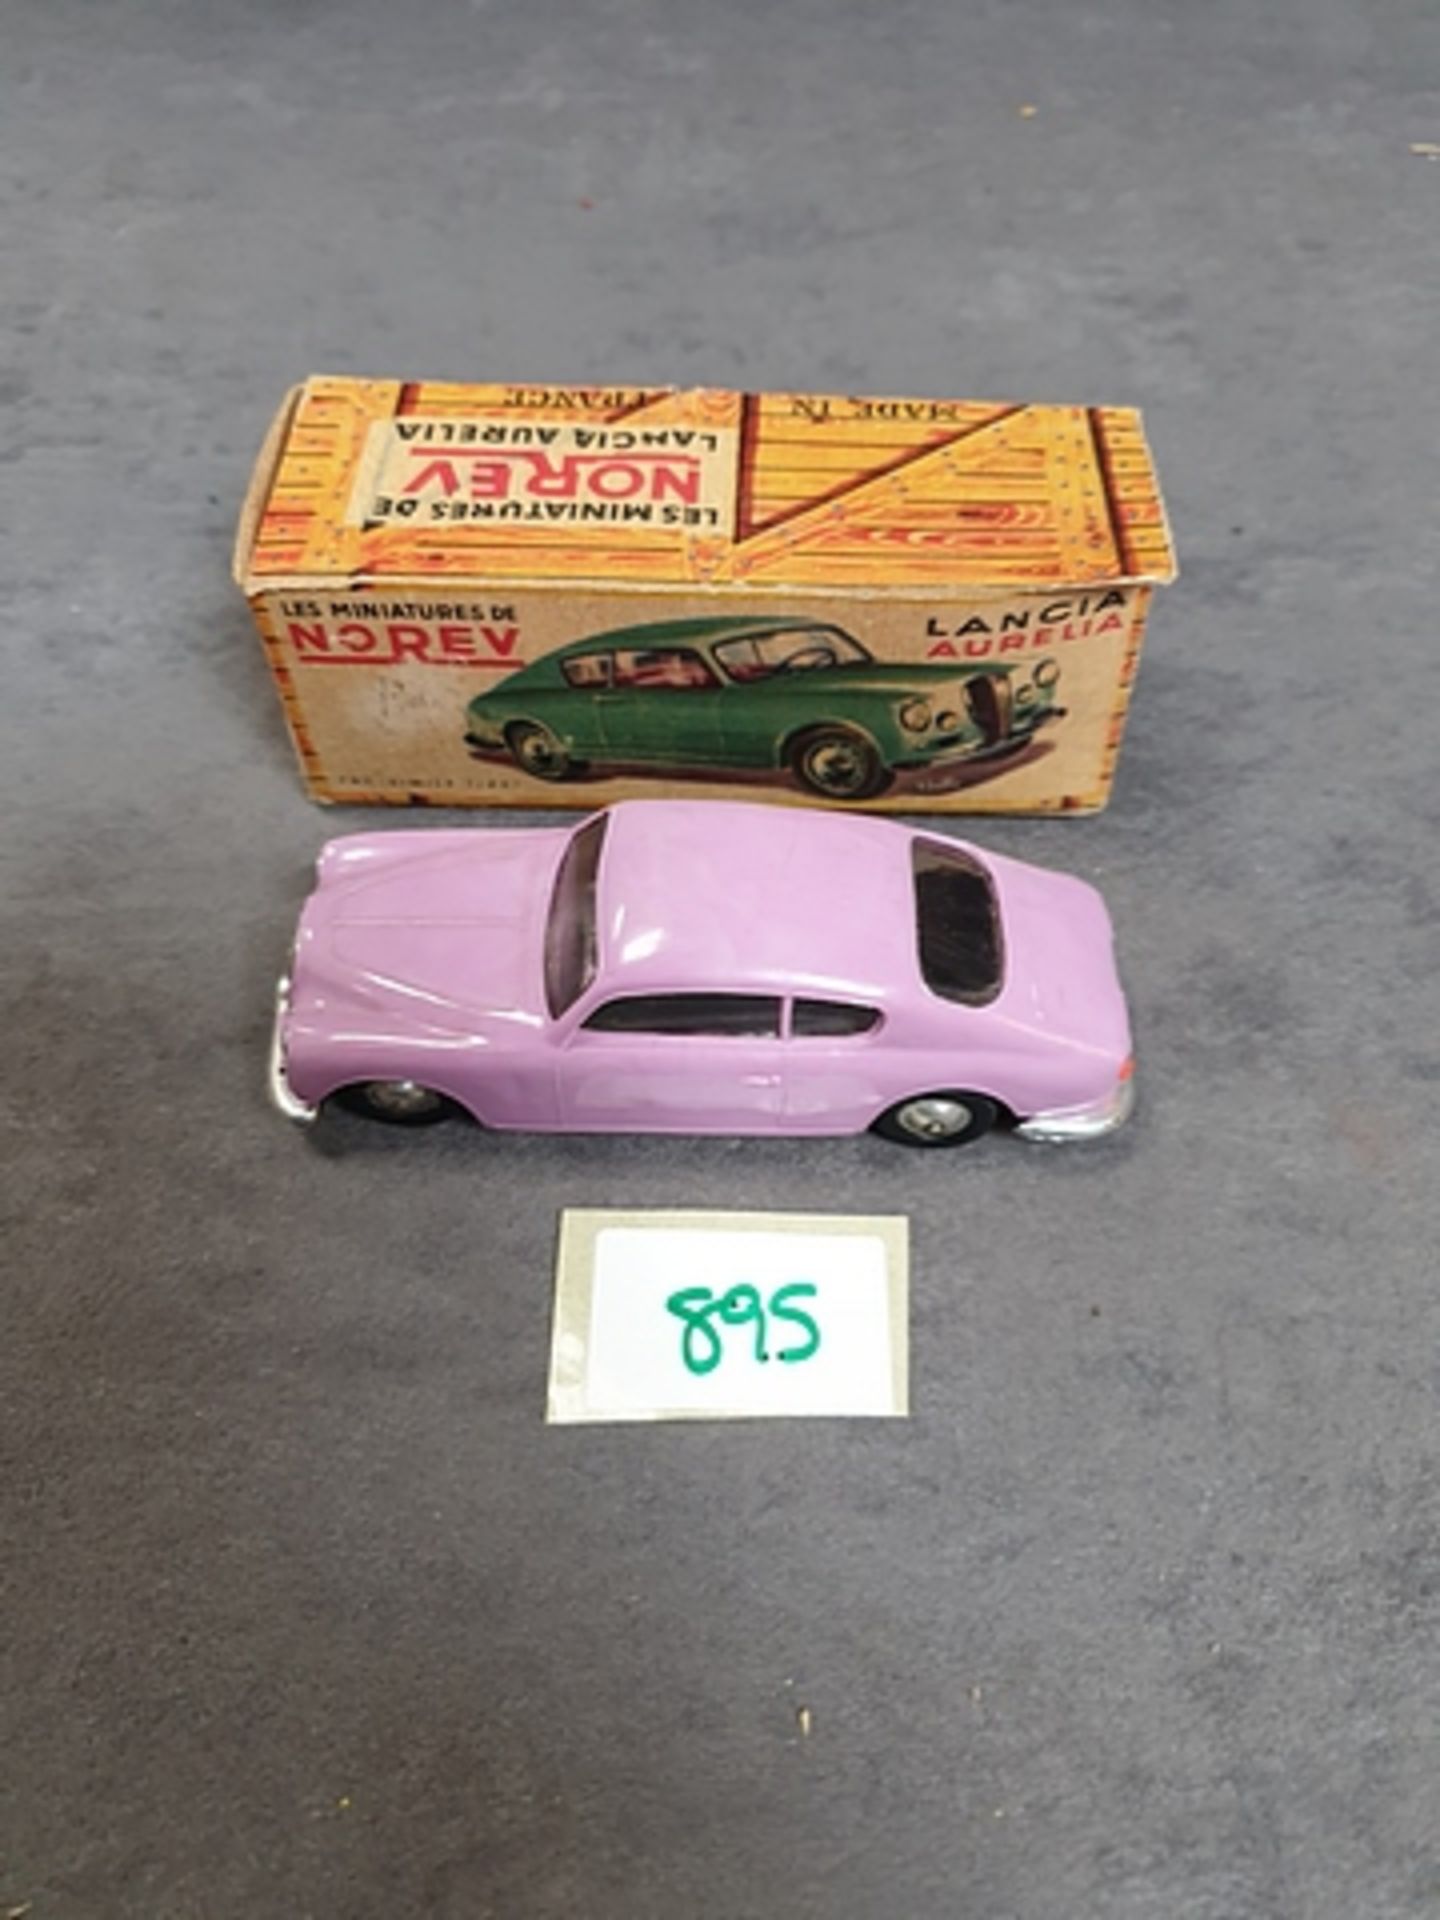 Norev (France) #22 Lancia Aurelia GT In Purple Scale 1/43 Plastic Completing Box - Image 2 of 2